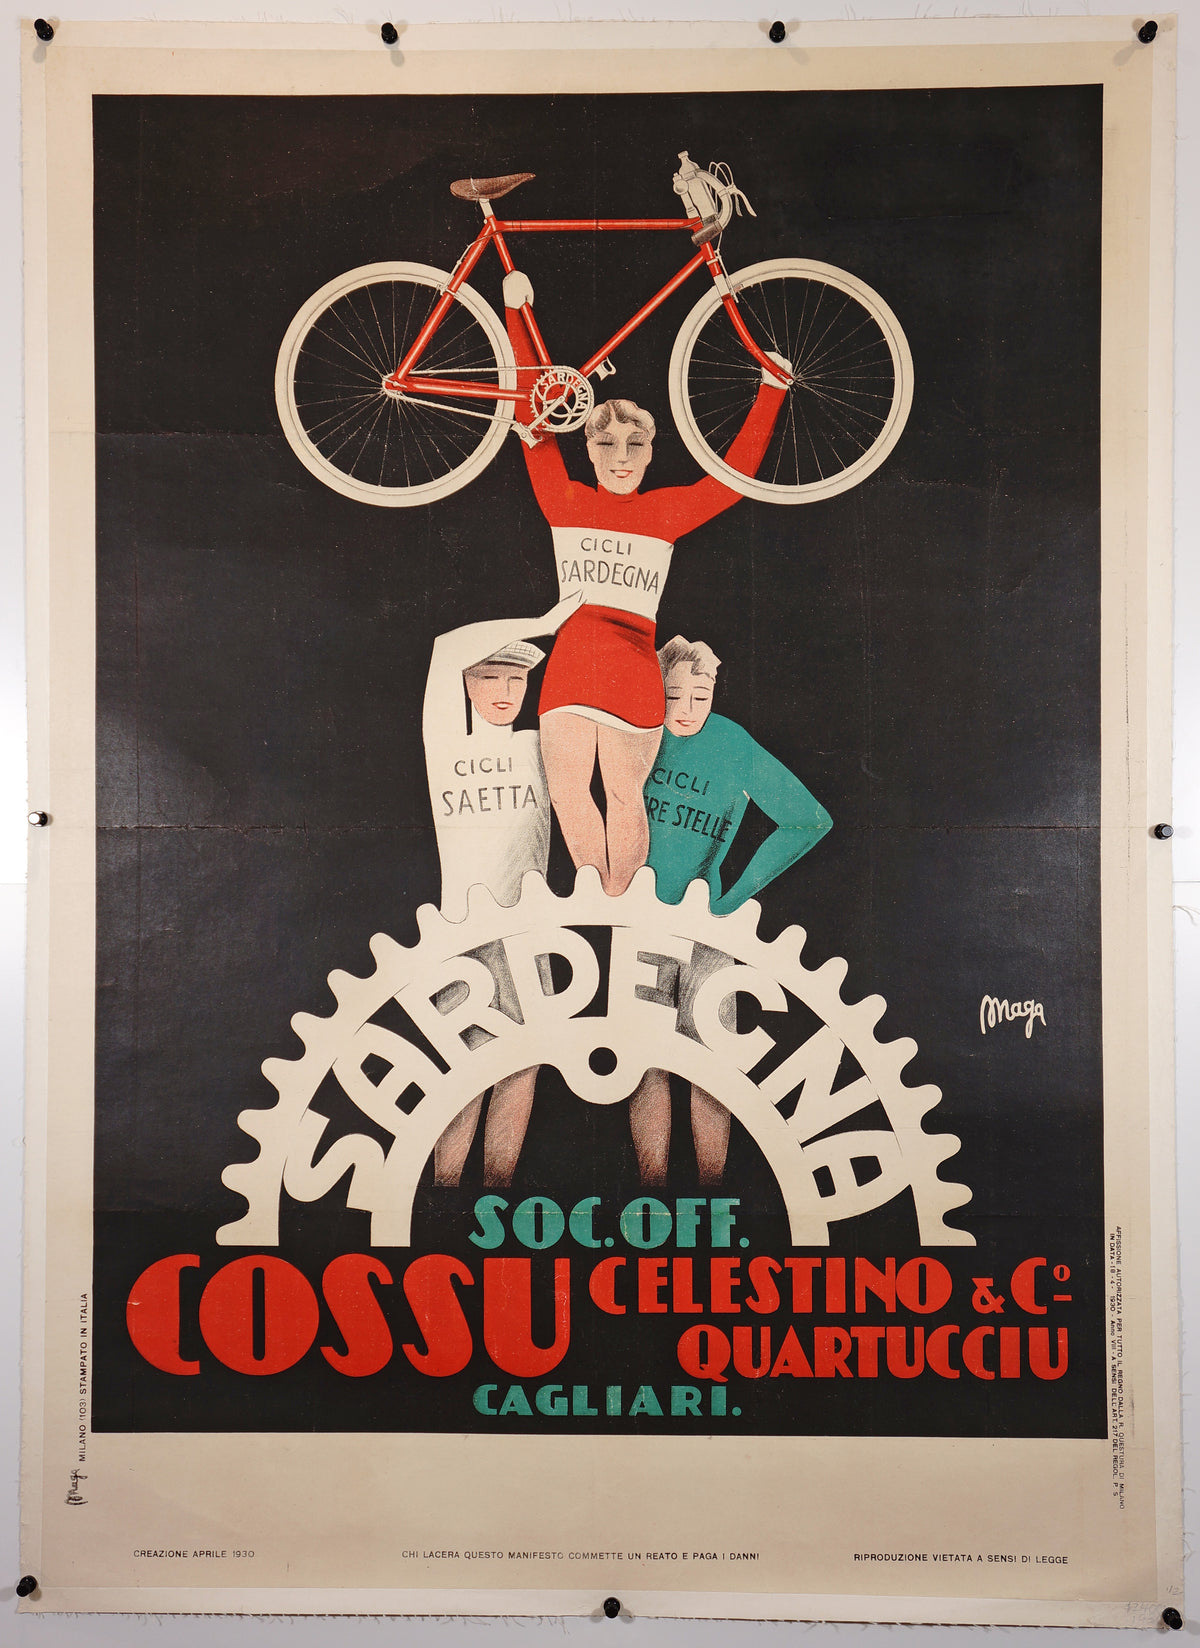 Sardegna Cycles - Authentic Vintage Poster